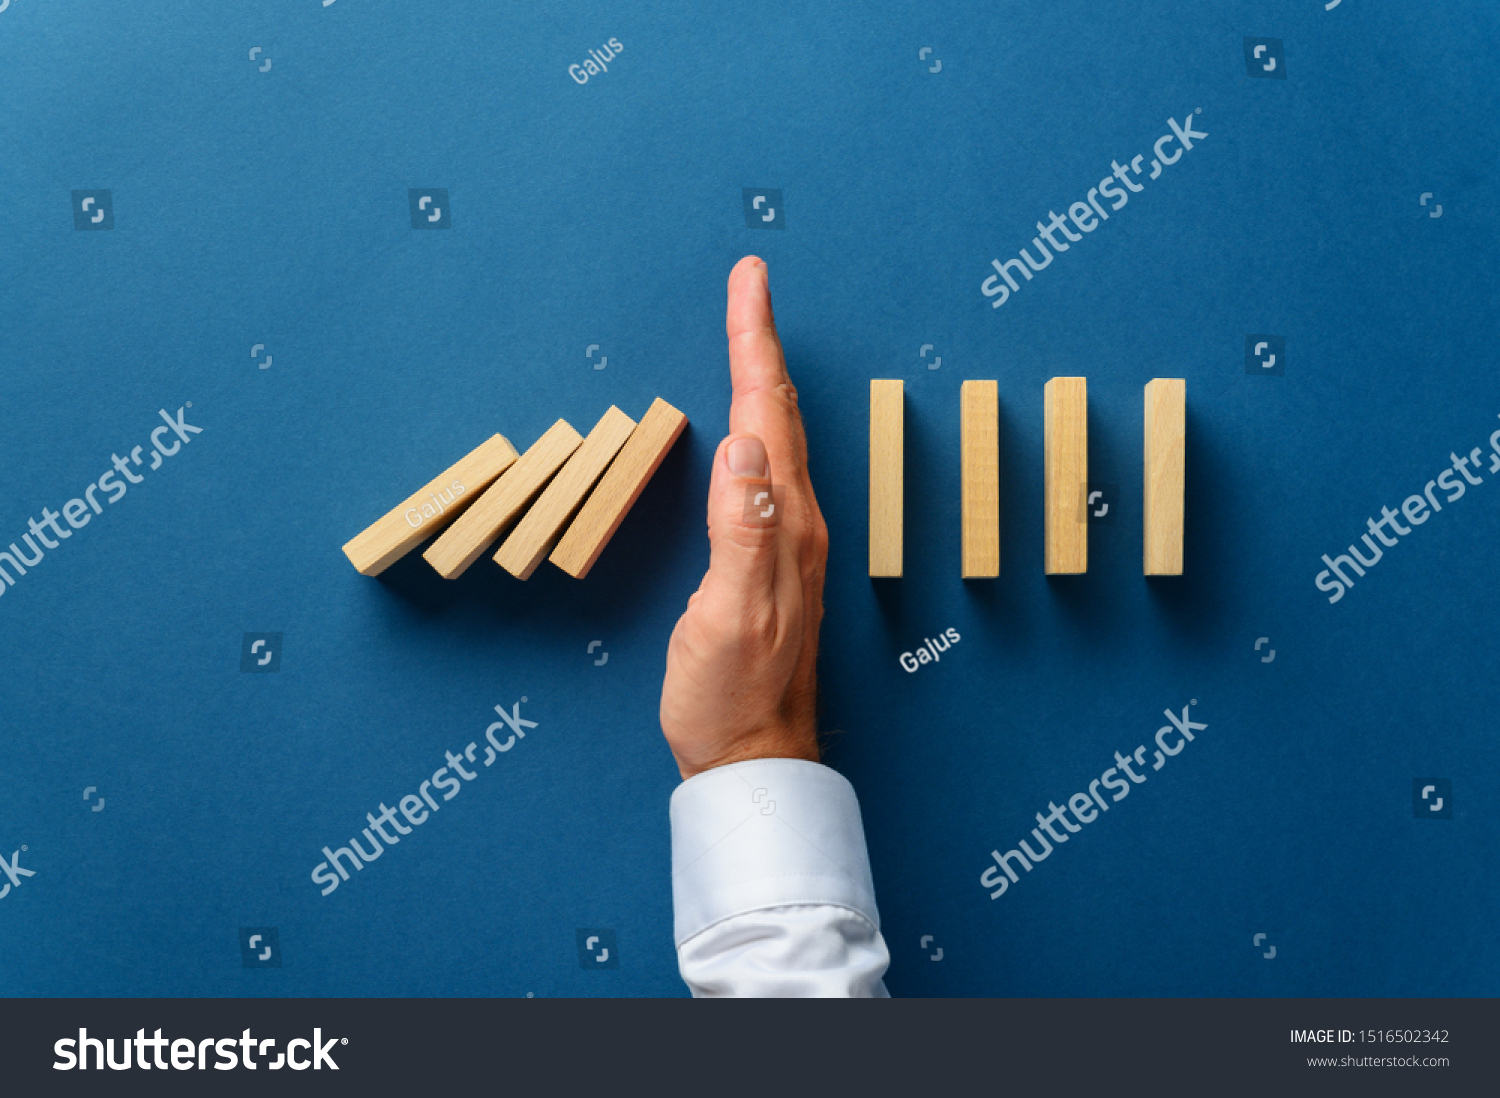 View from above of male hand interfering collapsing dominos in a conceptual image of business crisis management. Over navy blue background. #1516502342